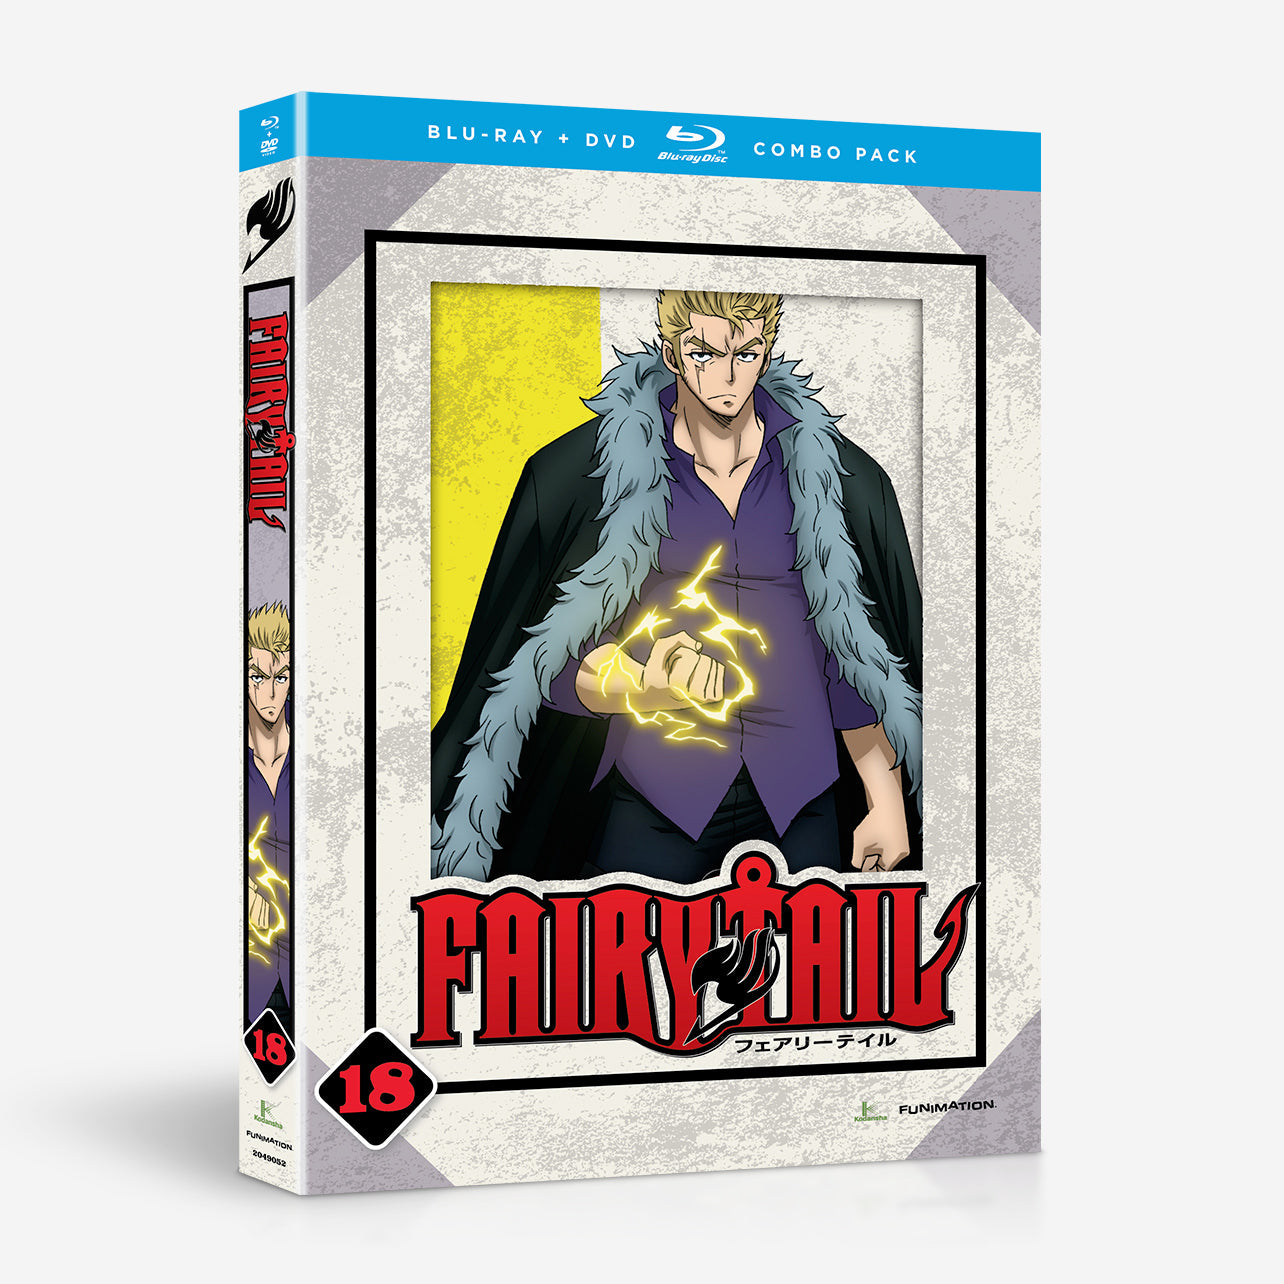 Fairy Tail - Part 18 - Blu-ray + DVD image count 0